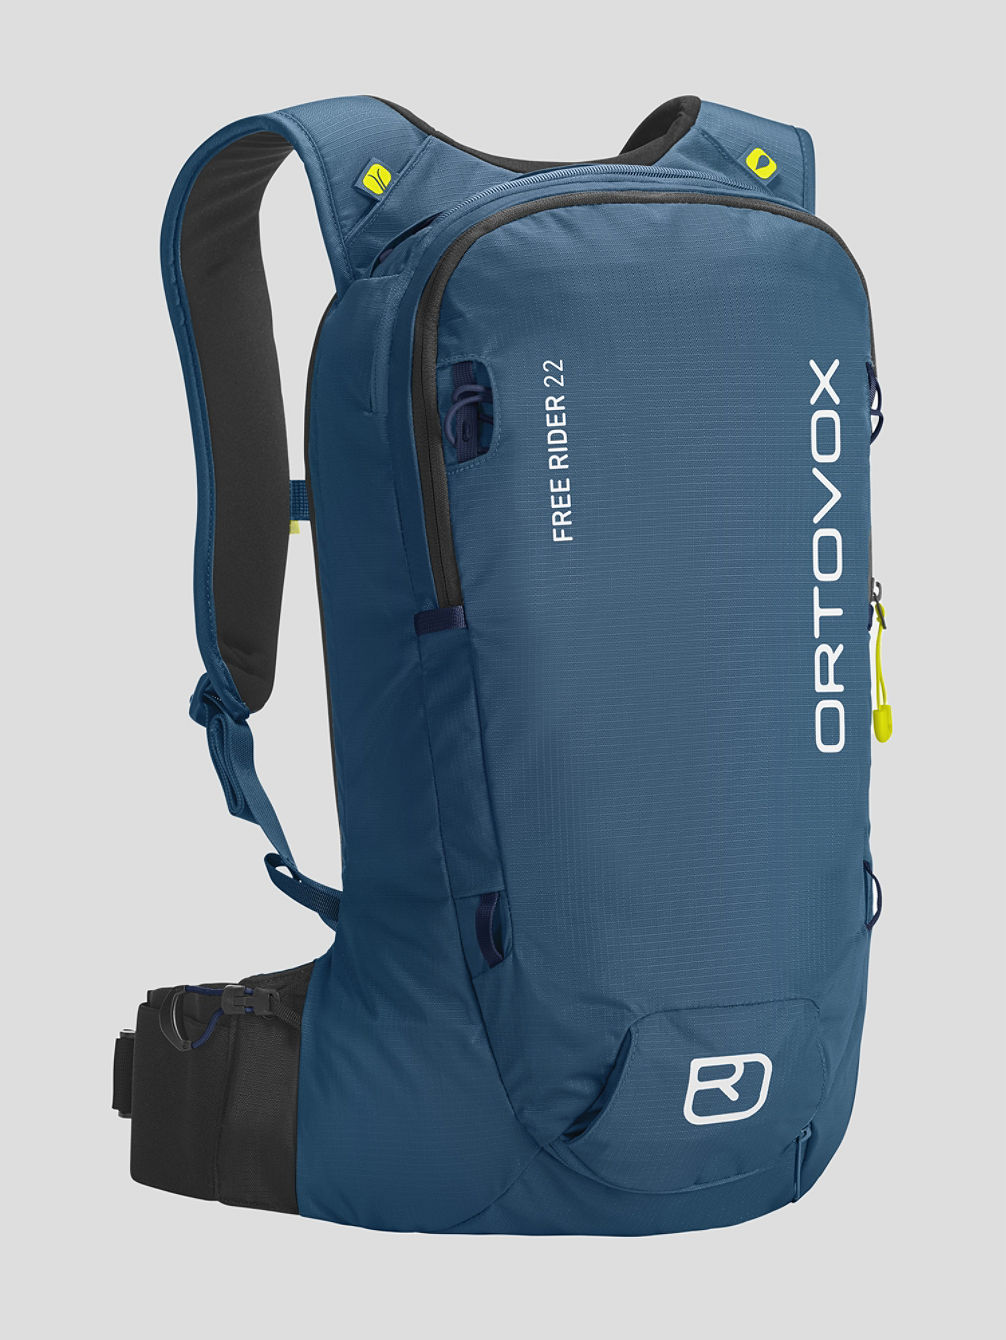 Free Rider 22L Backpack